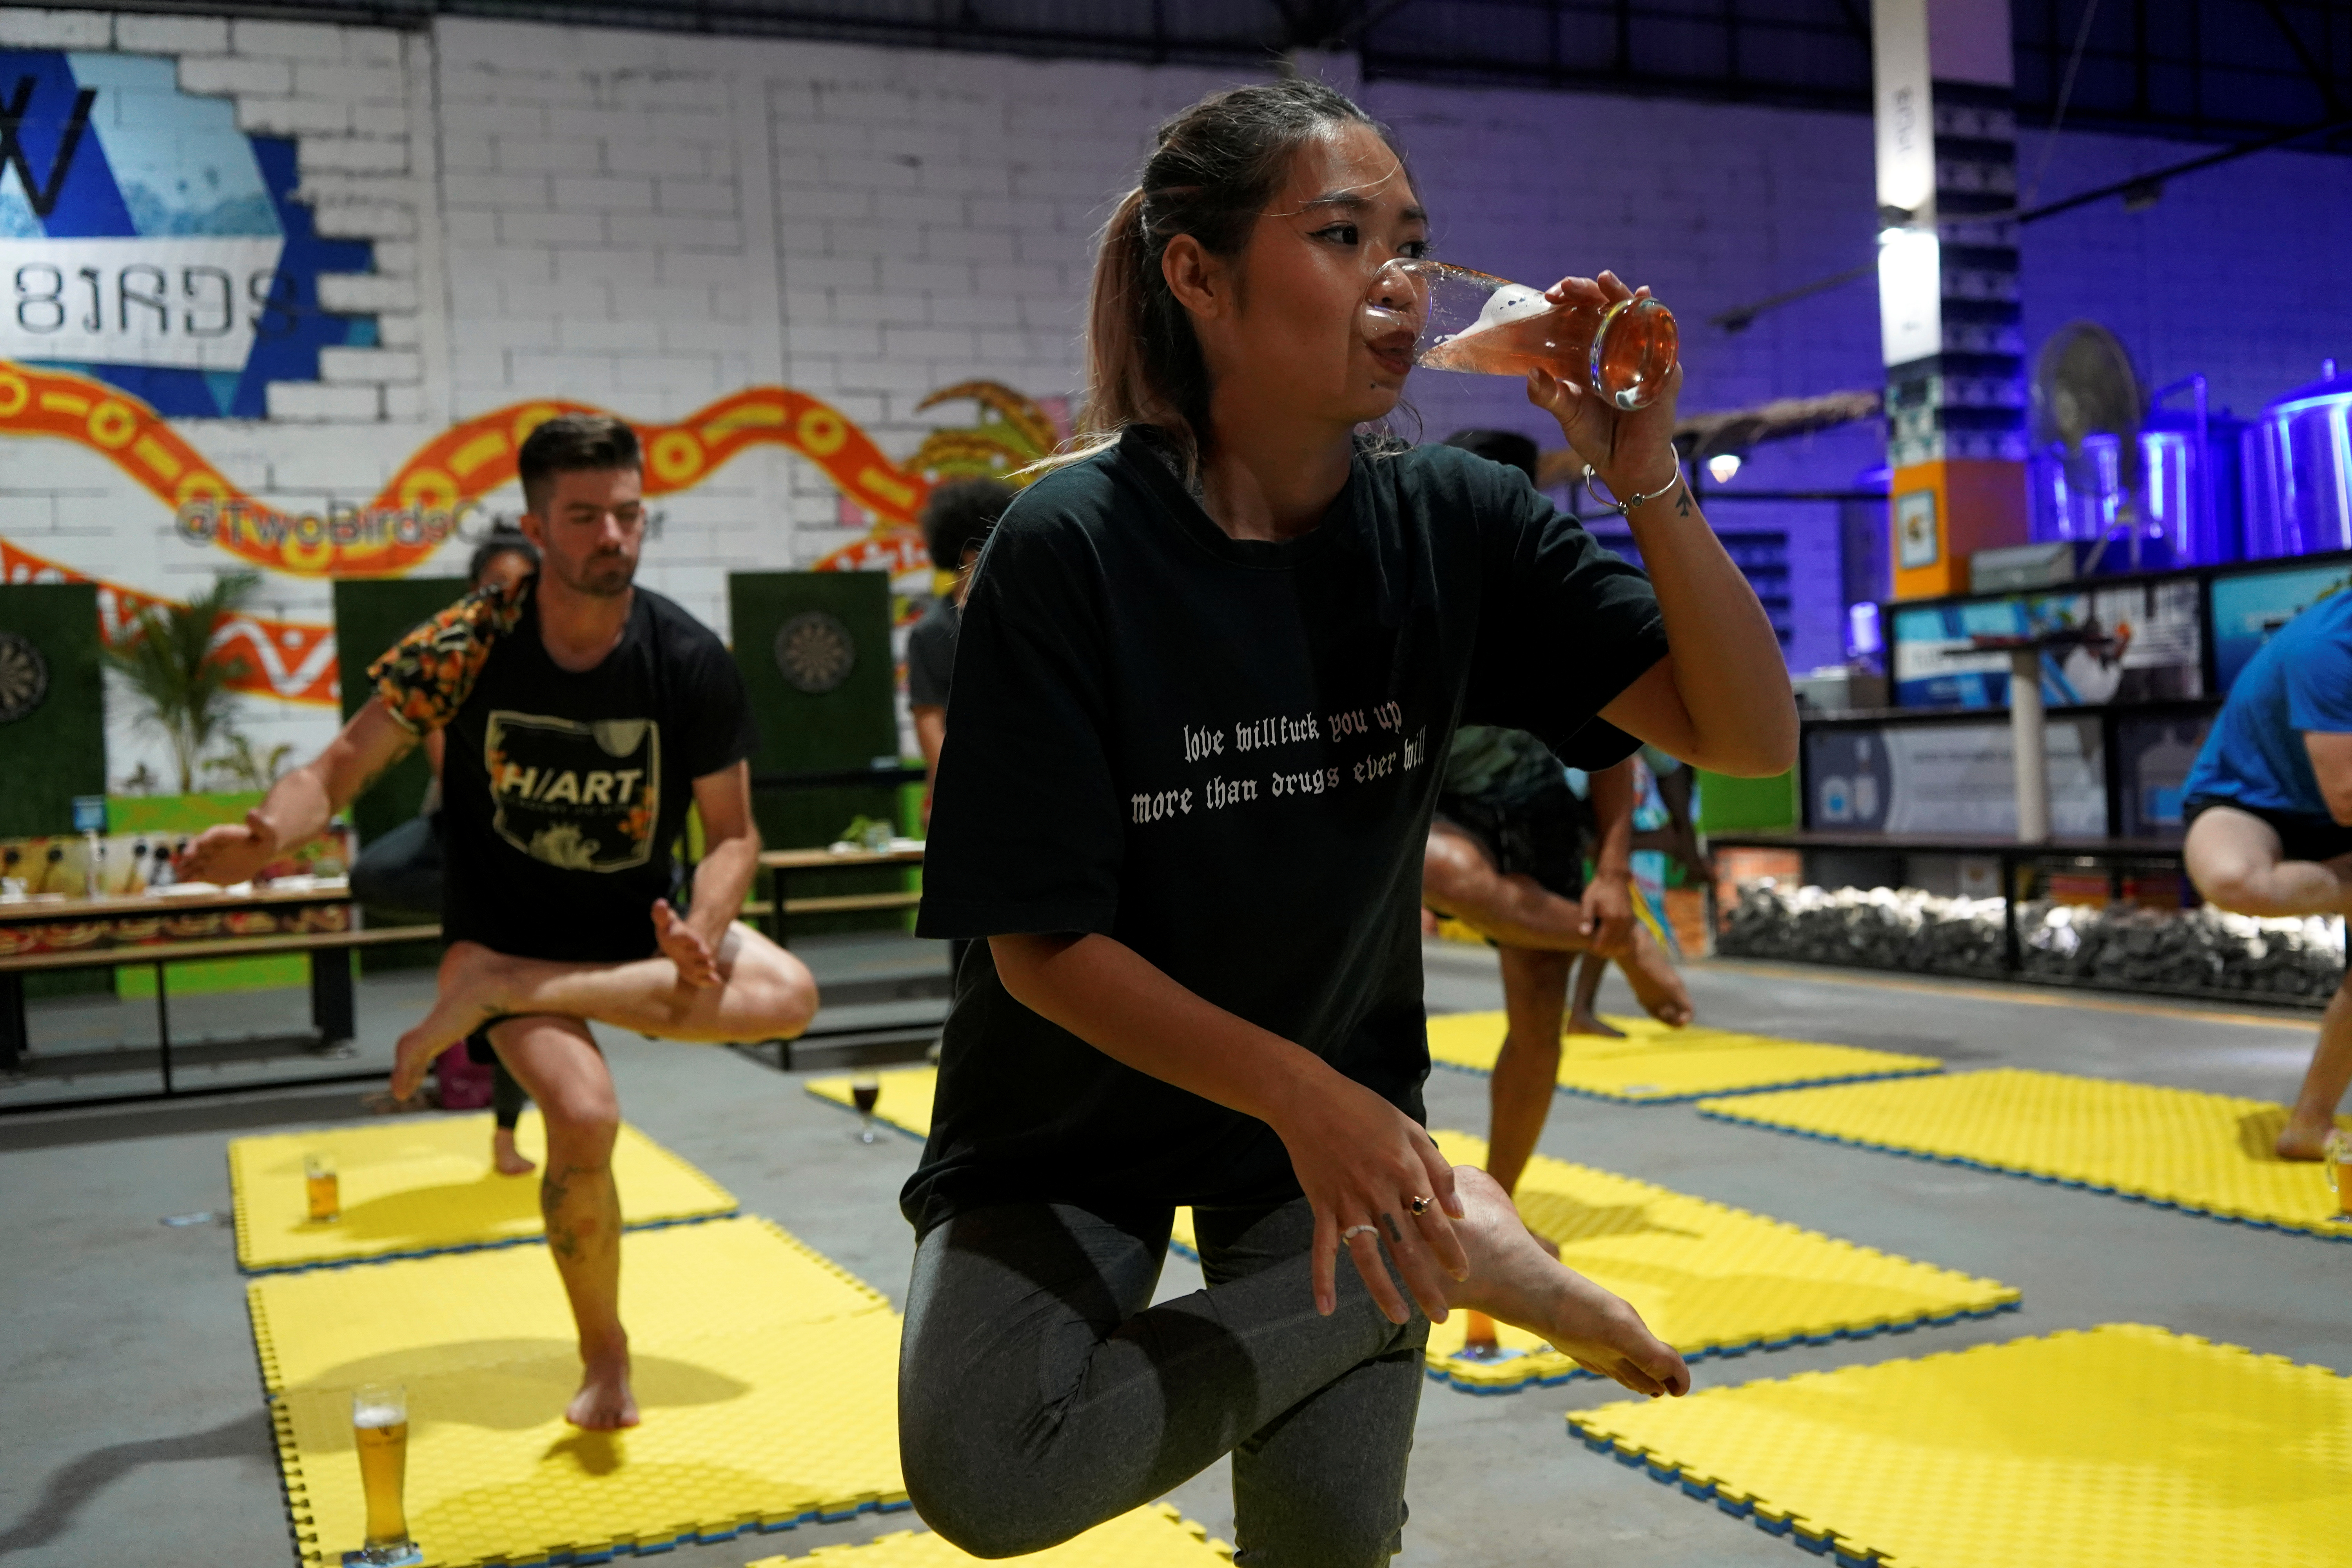 Sreyline Bacha participates in a beer yoga session, as the country eases the coronavirus disease (COVID-19) restrictions, at a craft brewery in Phnom Penh, Cambodia January 19, 2021. Picture taken January 19, 2021. REUTERS/Cindy Liu